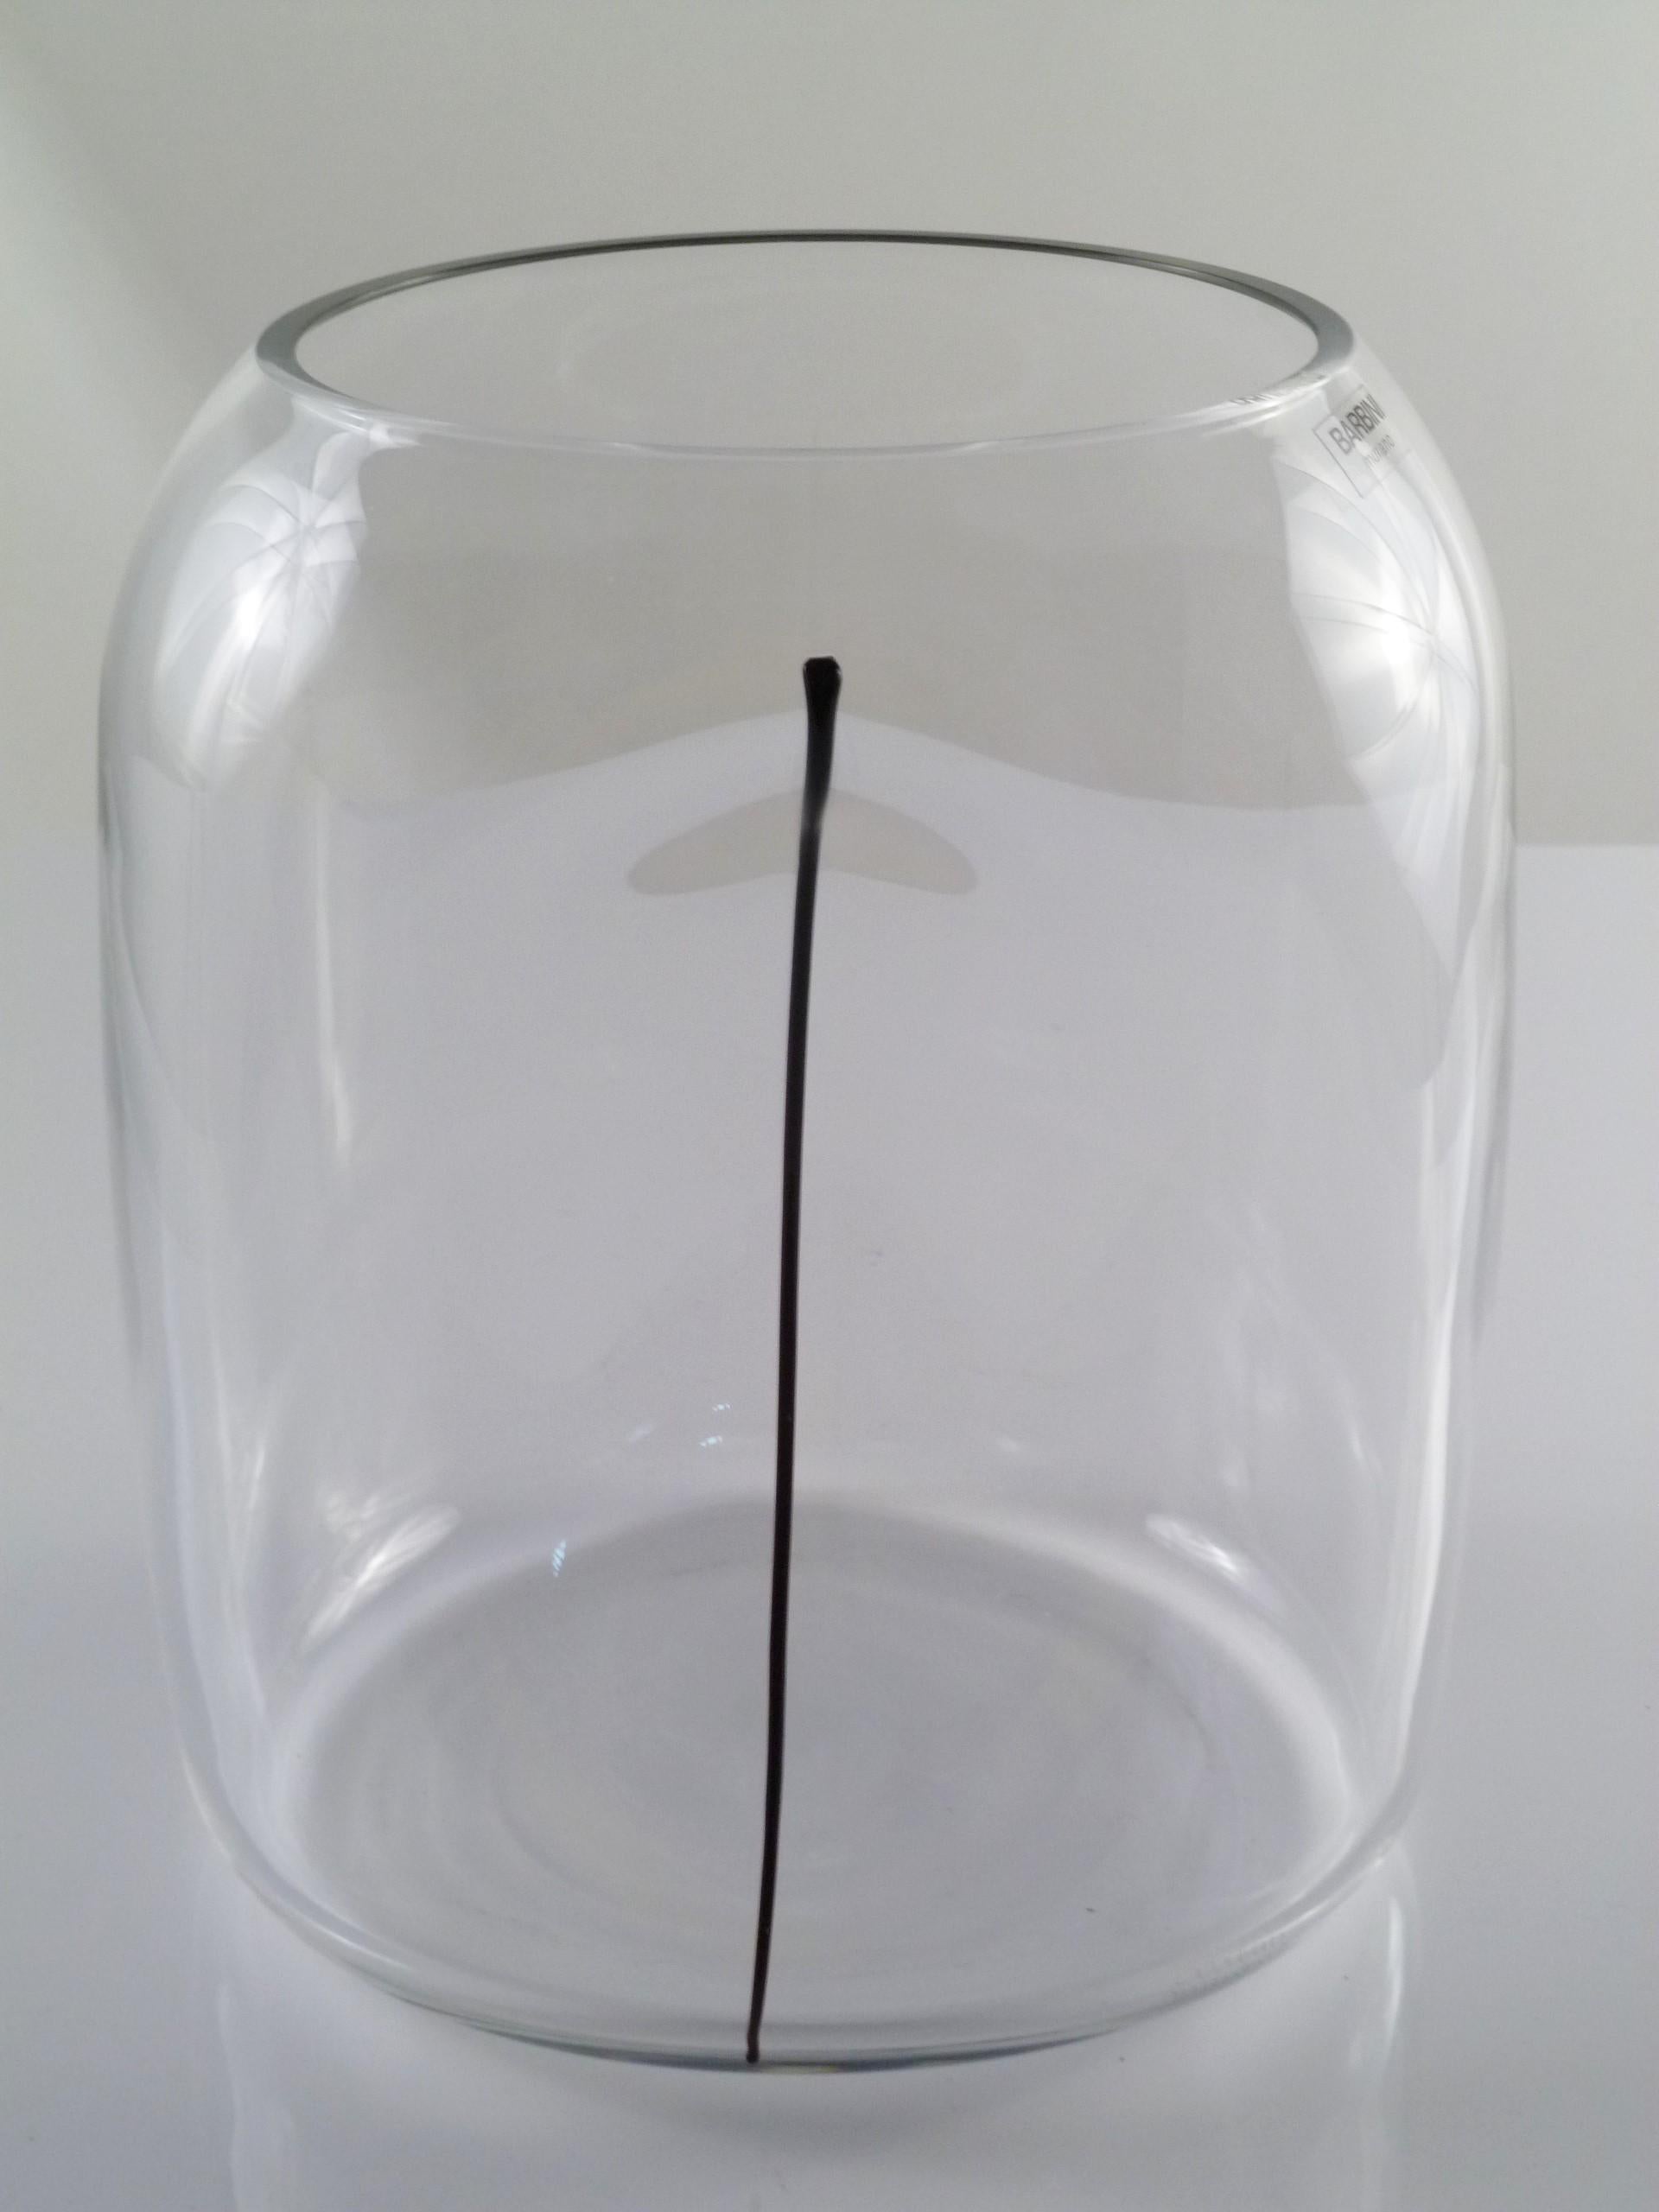 Large and fat, this clear blown glass Alfredo Barbini vase has an Minimalist indented design with an applied black stripe of glass. A quite decorative Murano piece with an etched Barbini Murano signature on a lower side and a Barbini Murano label